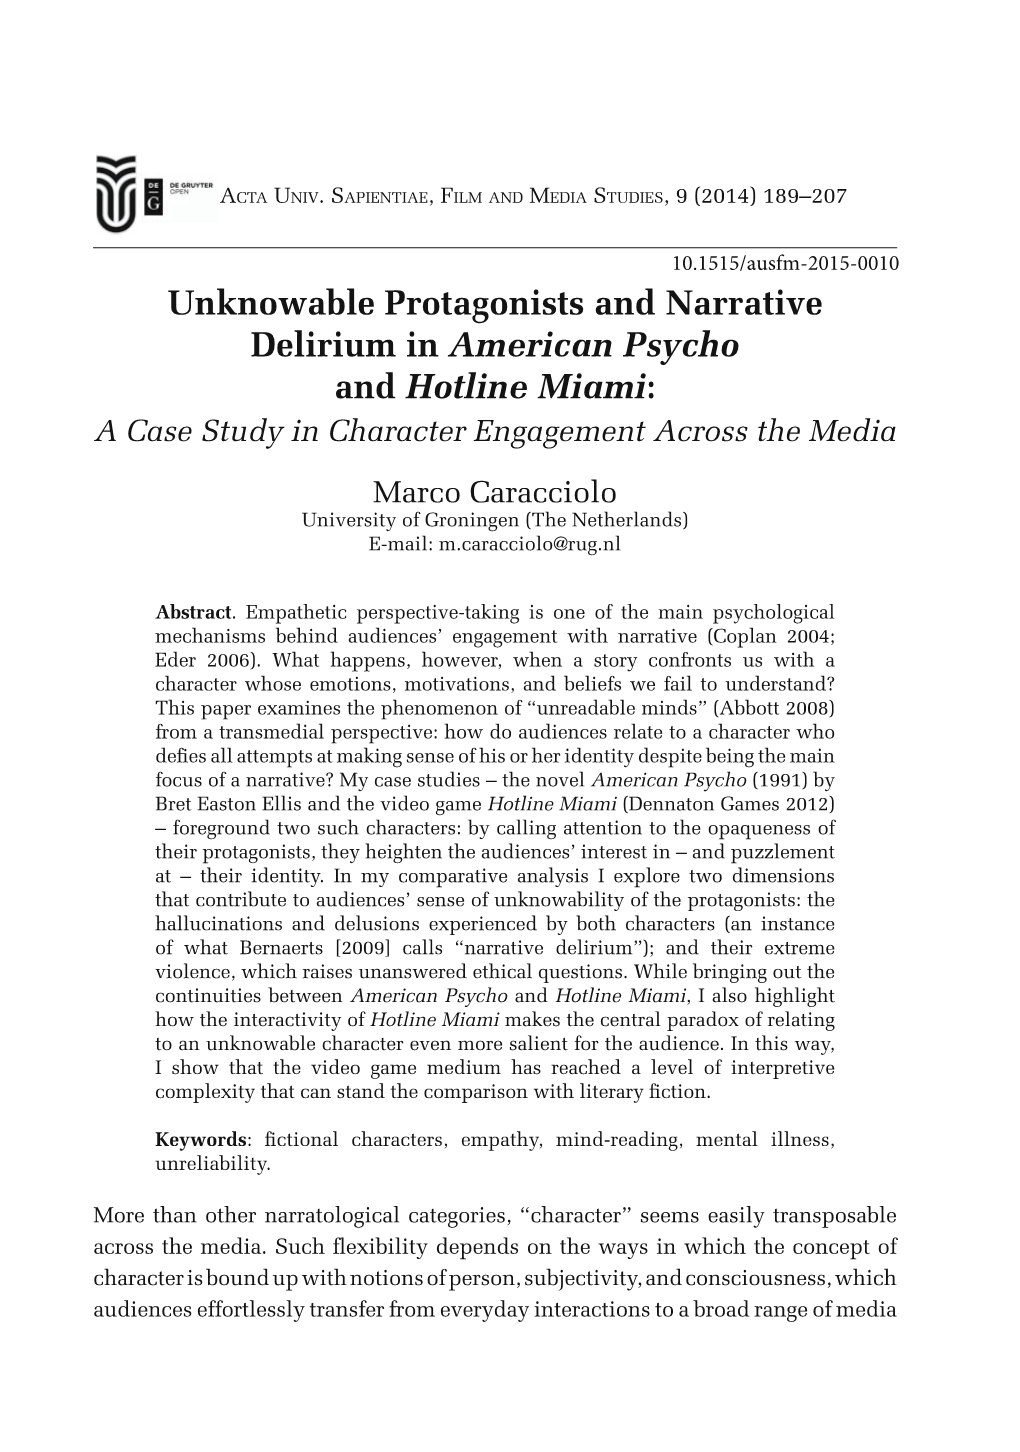 Unknowable Protagonists and Narrative Delirium in American Psycho and Hotline Miami: a Case Study in Character Engagement Across the Media